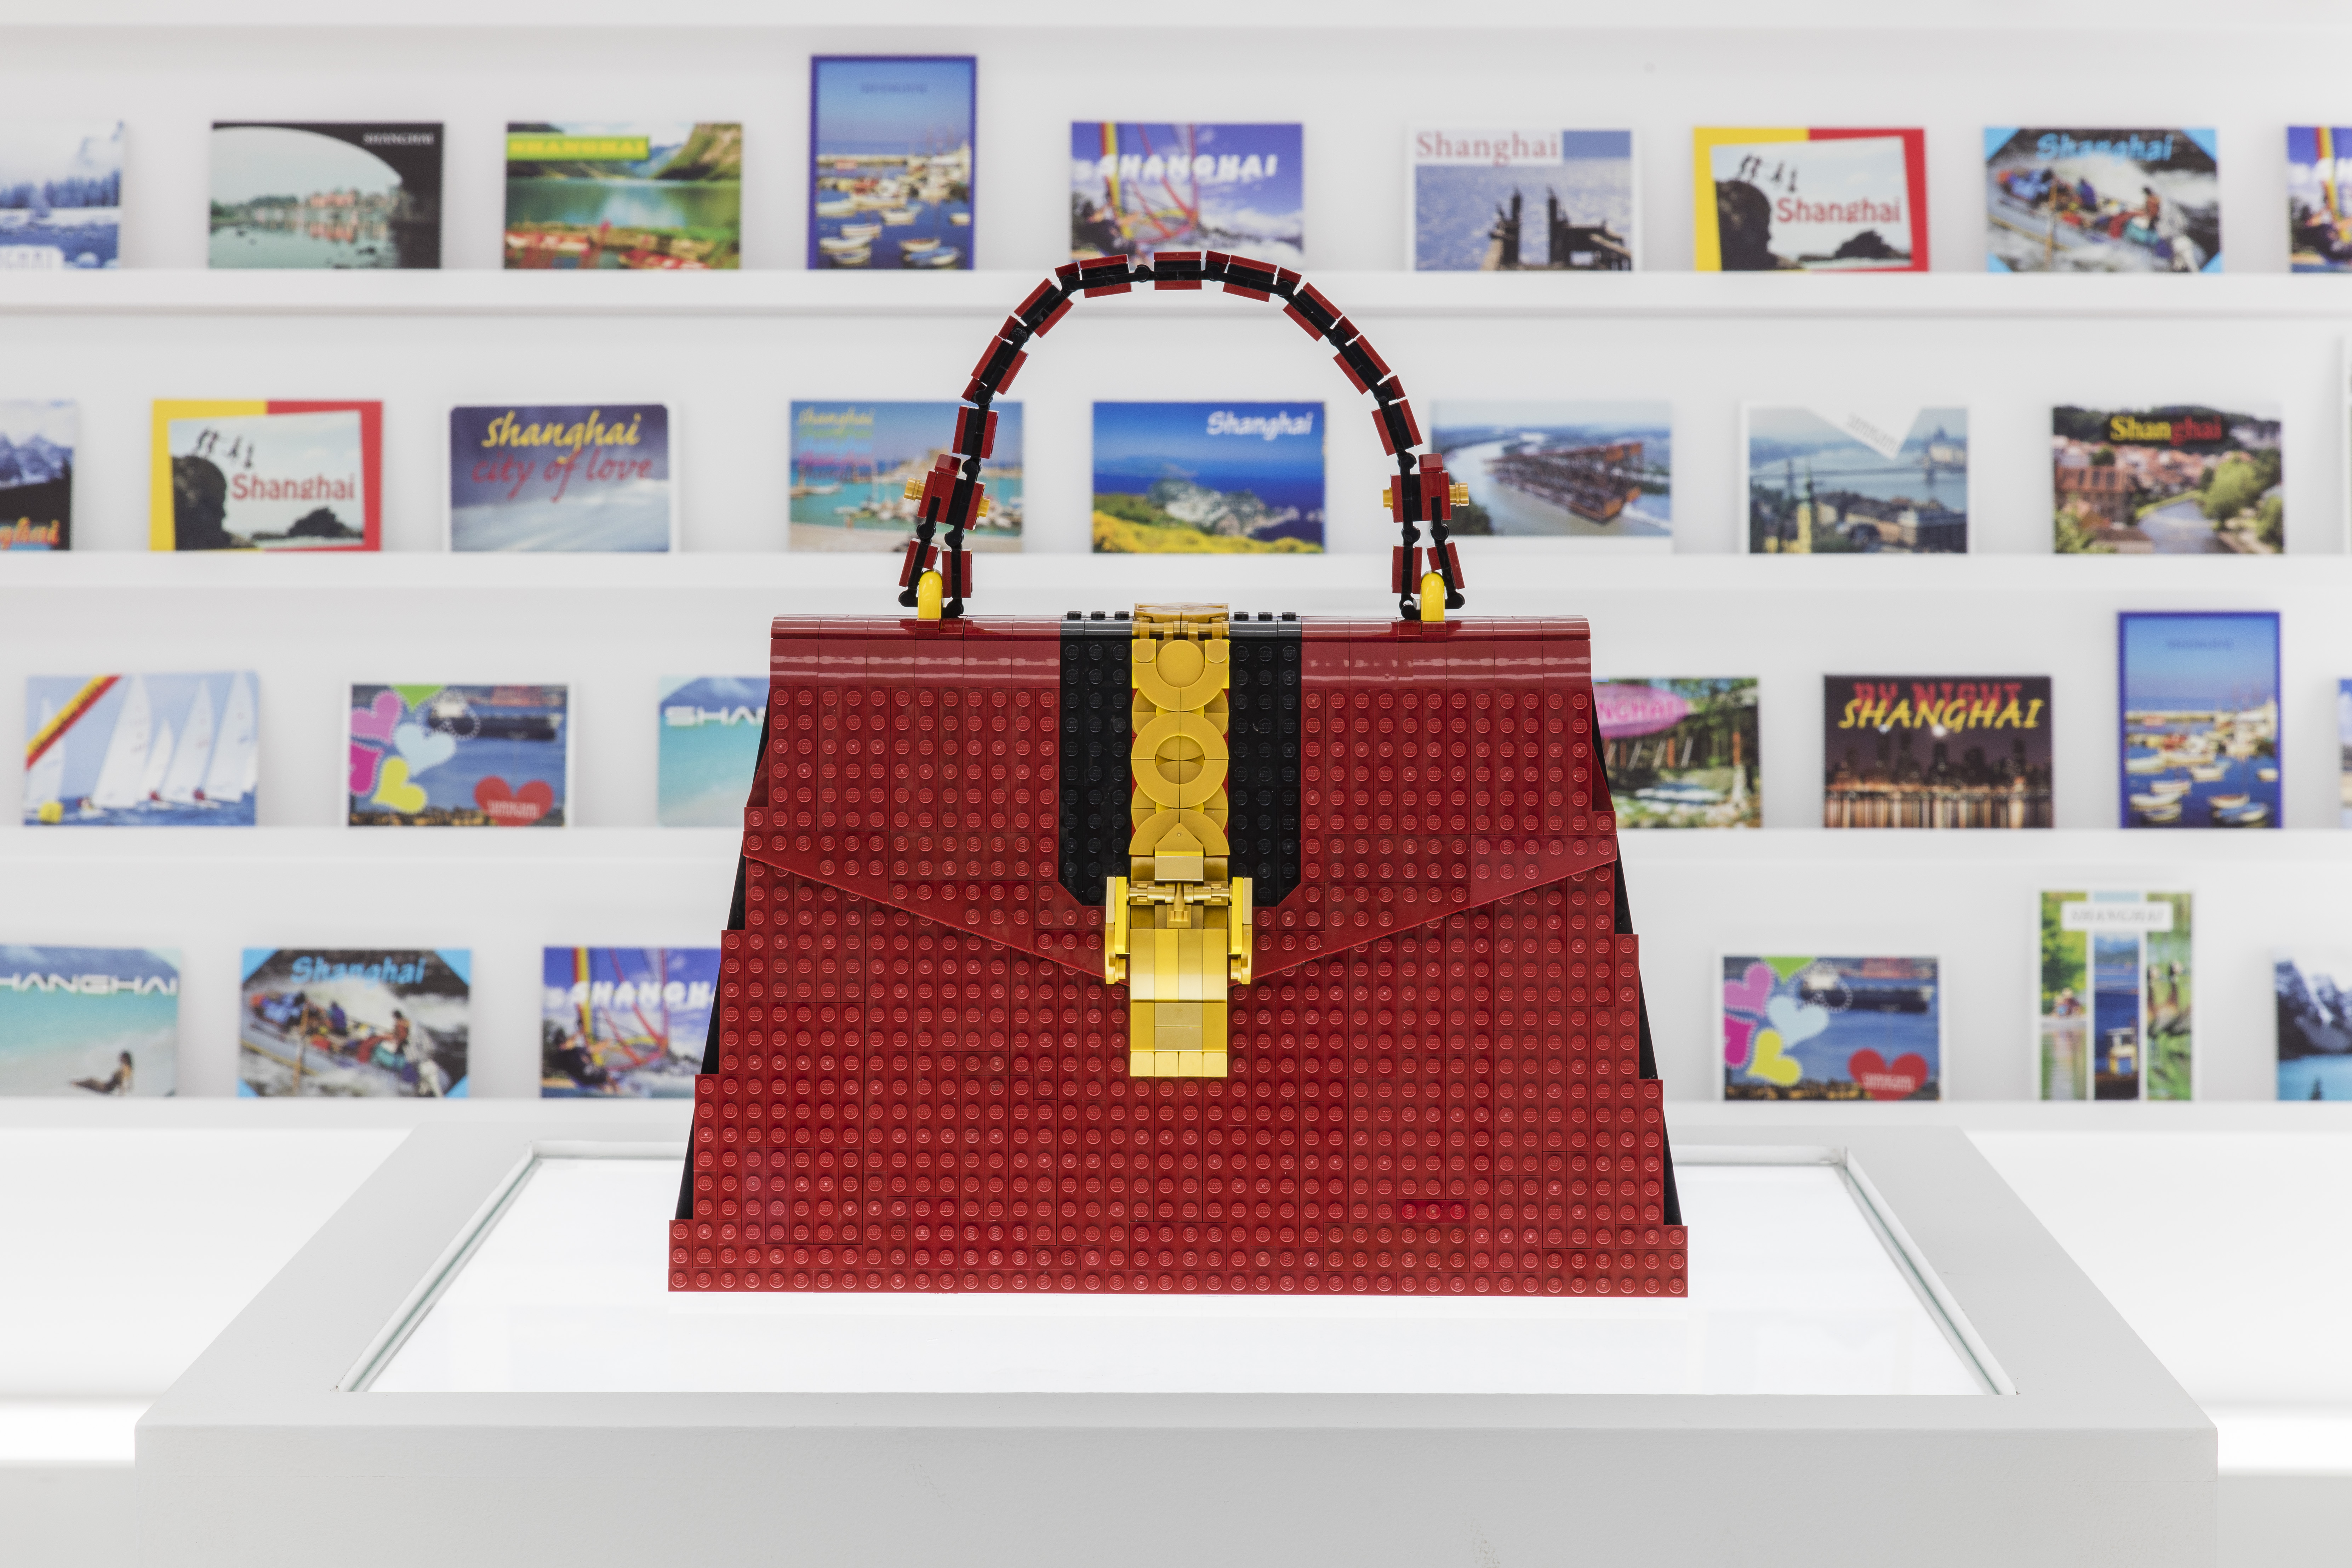 Andy Hung Chi-Kin (LEGO Certified Professional) Gucci Sylvie bag made with LEGO bricks 